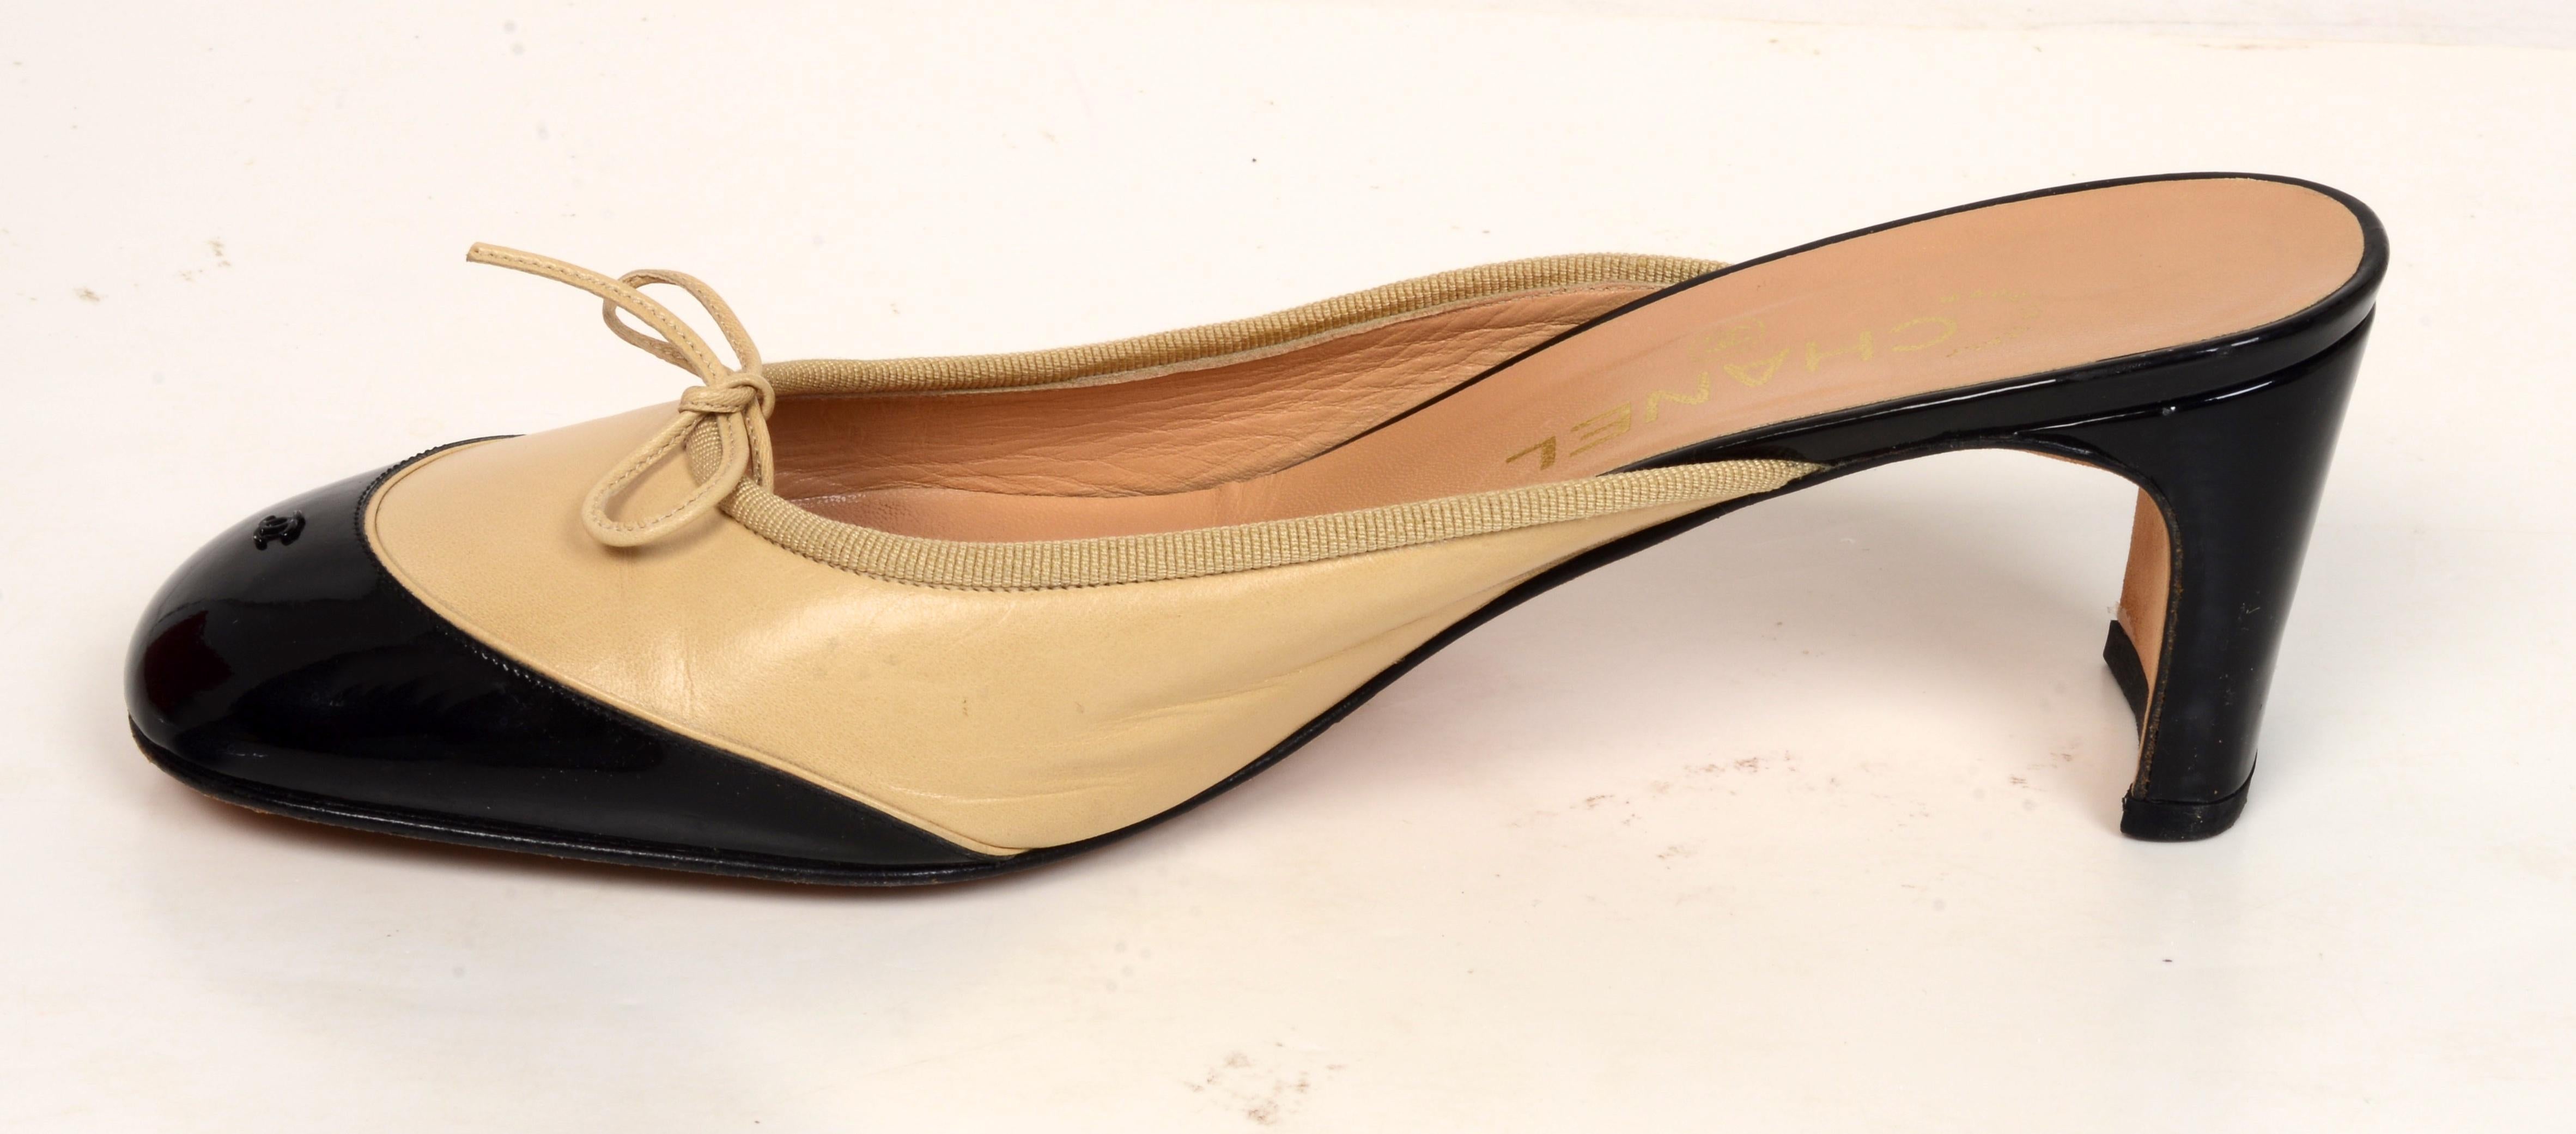 Chanel Leather Mules with Interlocking CC Logo in Cream and Black Patent Leather. Lightly worn and in excellent condition. Made in Italy size 39 1/2.